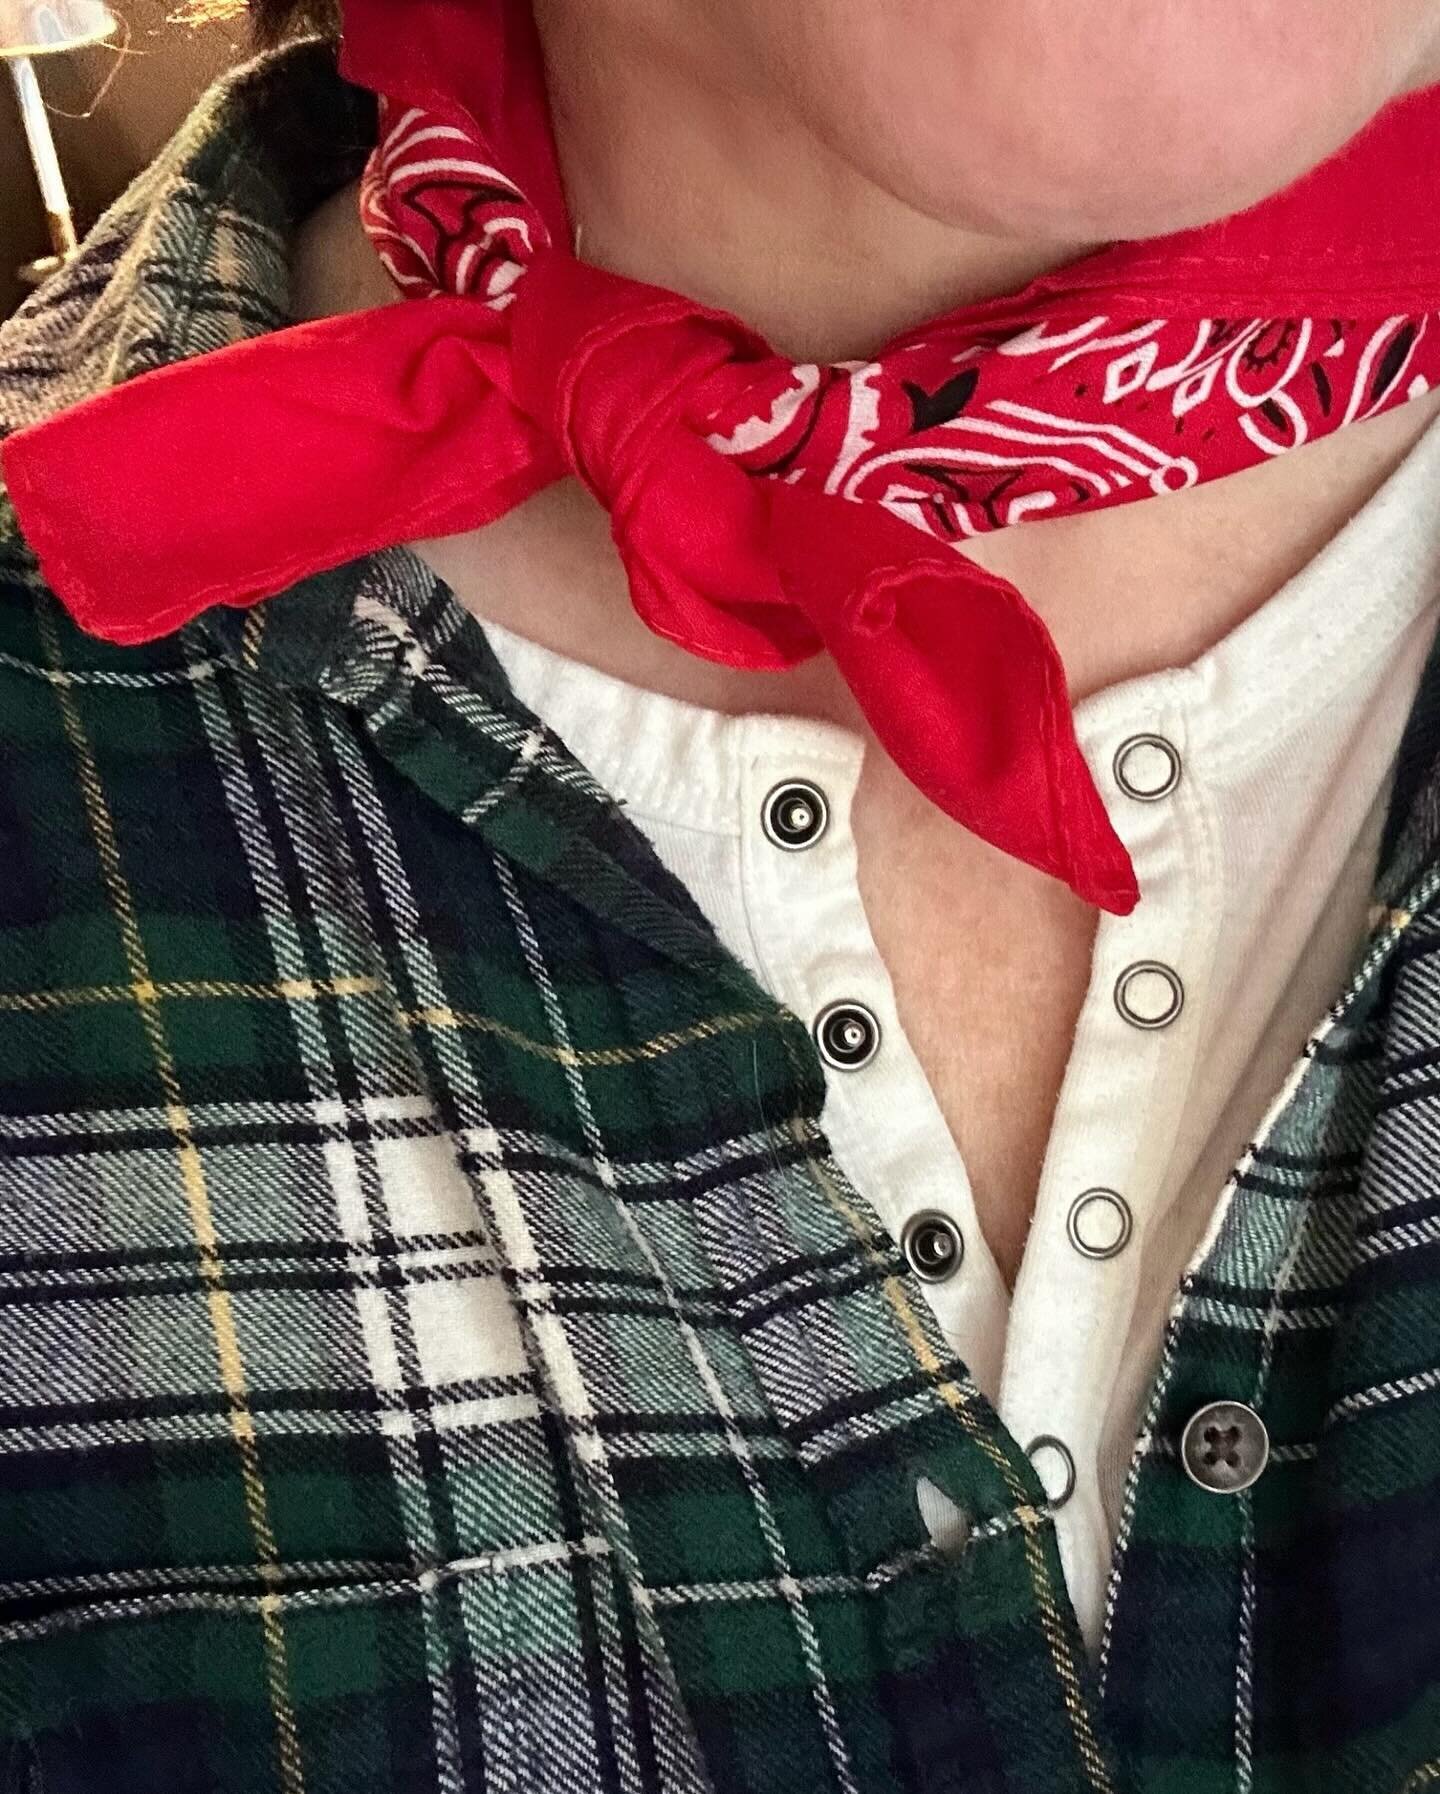 I&rsquo;m re-embracing the classic bandana. Red or navy. Please join me.

Next up: Brooches. 

#personalstyle #bandana #redbandana #accessories #ootd #plaidflannel #flannelshirt #vintagestyle #preppy